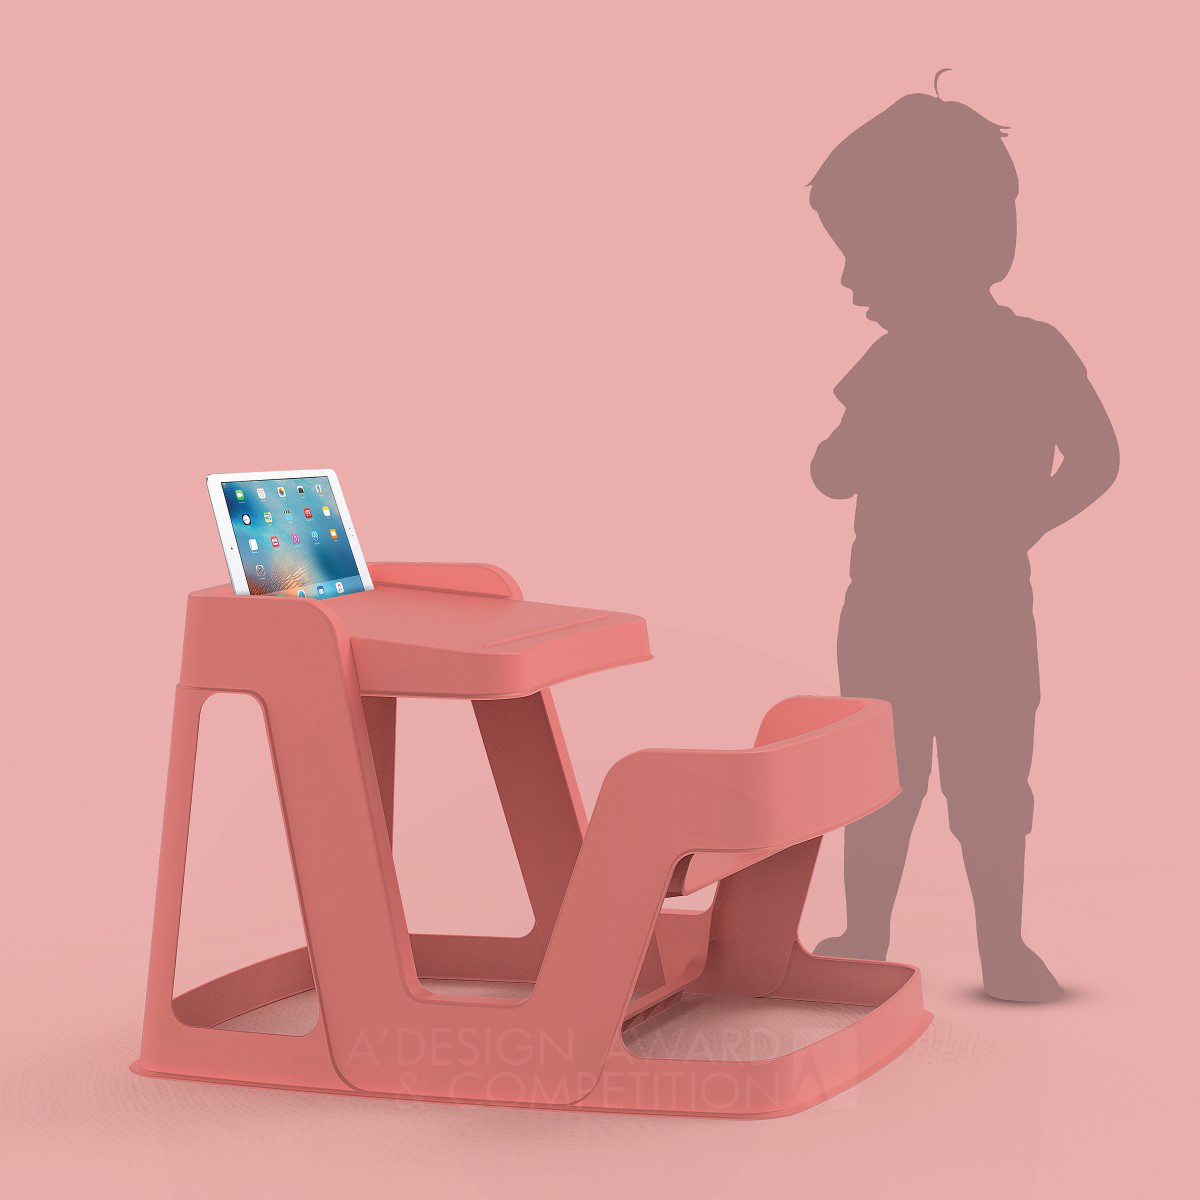 david dos santos wins Bronze at the prestigious A' Baby, Kids and Children's Products Design Award with Paradiso First Desk Baby Desk for Creative Development.